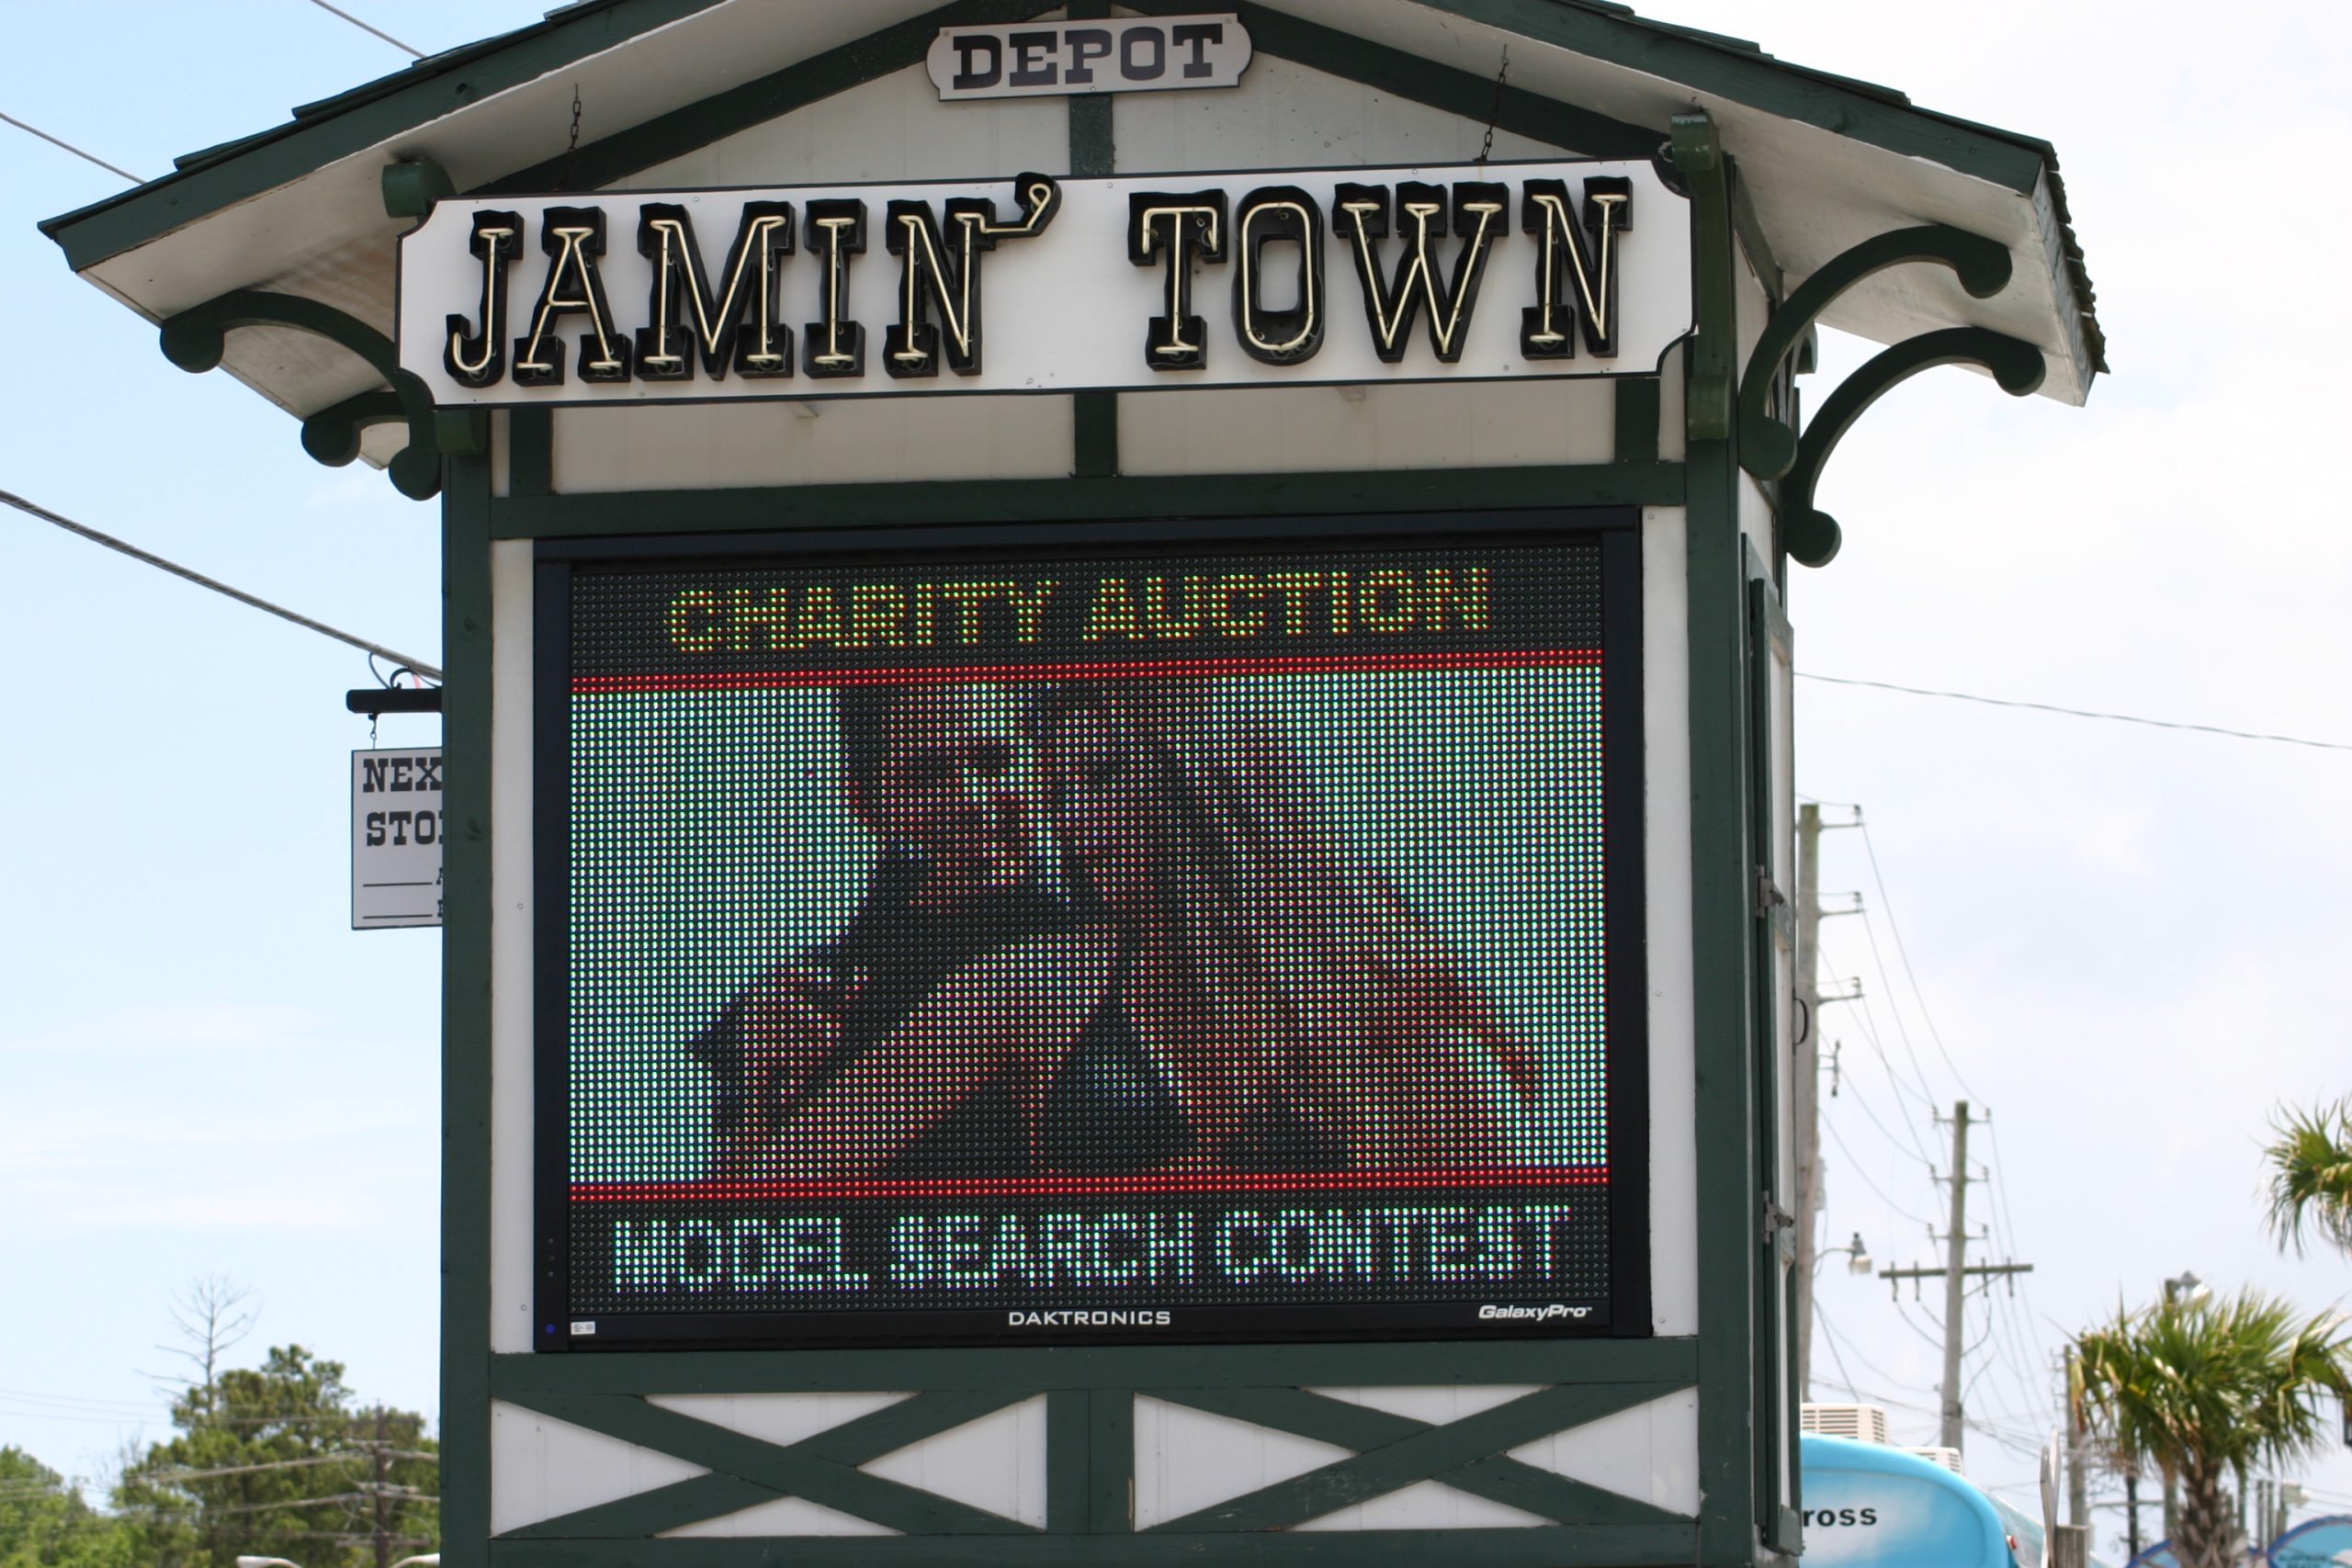 EVENTS AT JAMIN LEATHER MYRTLE BEACH